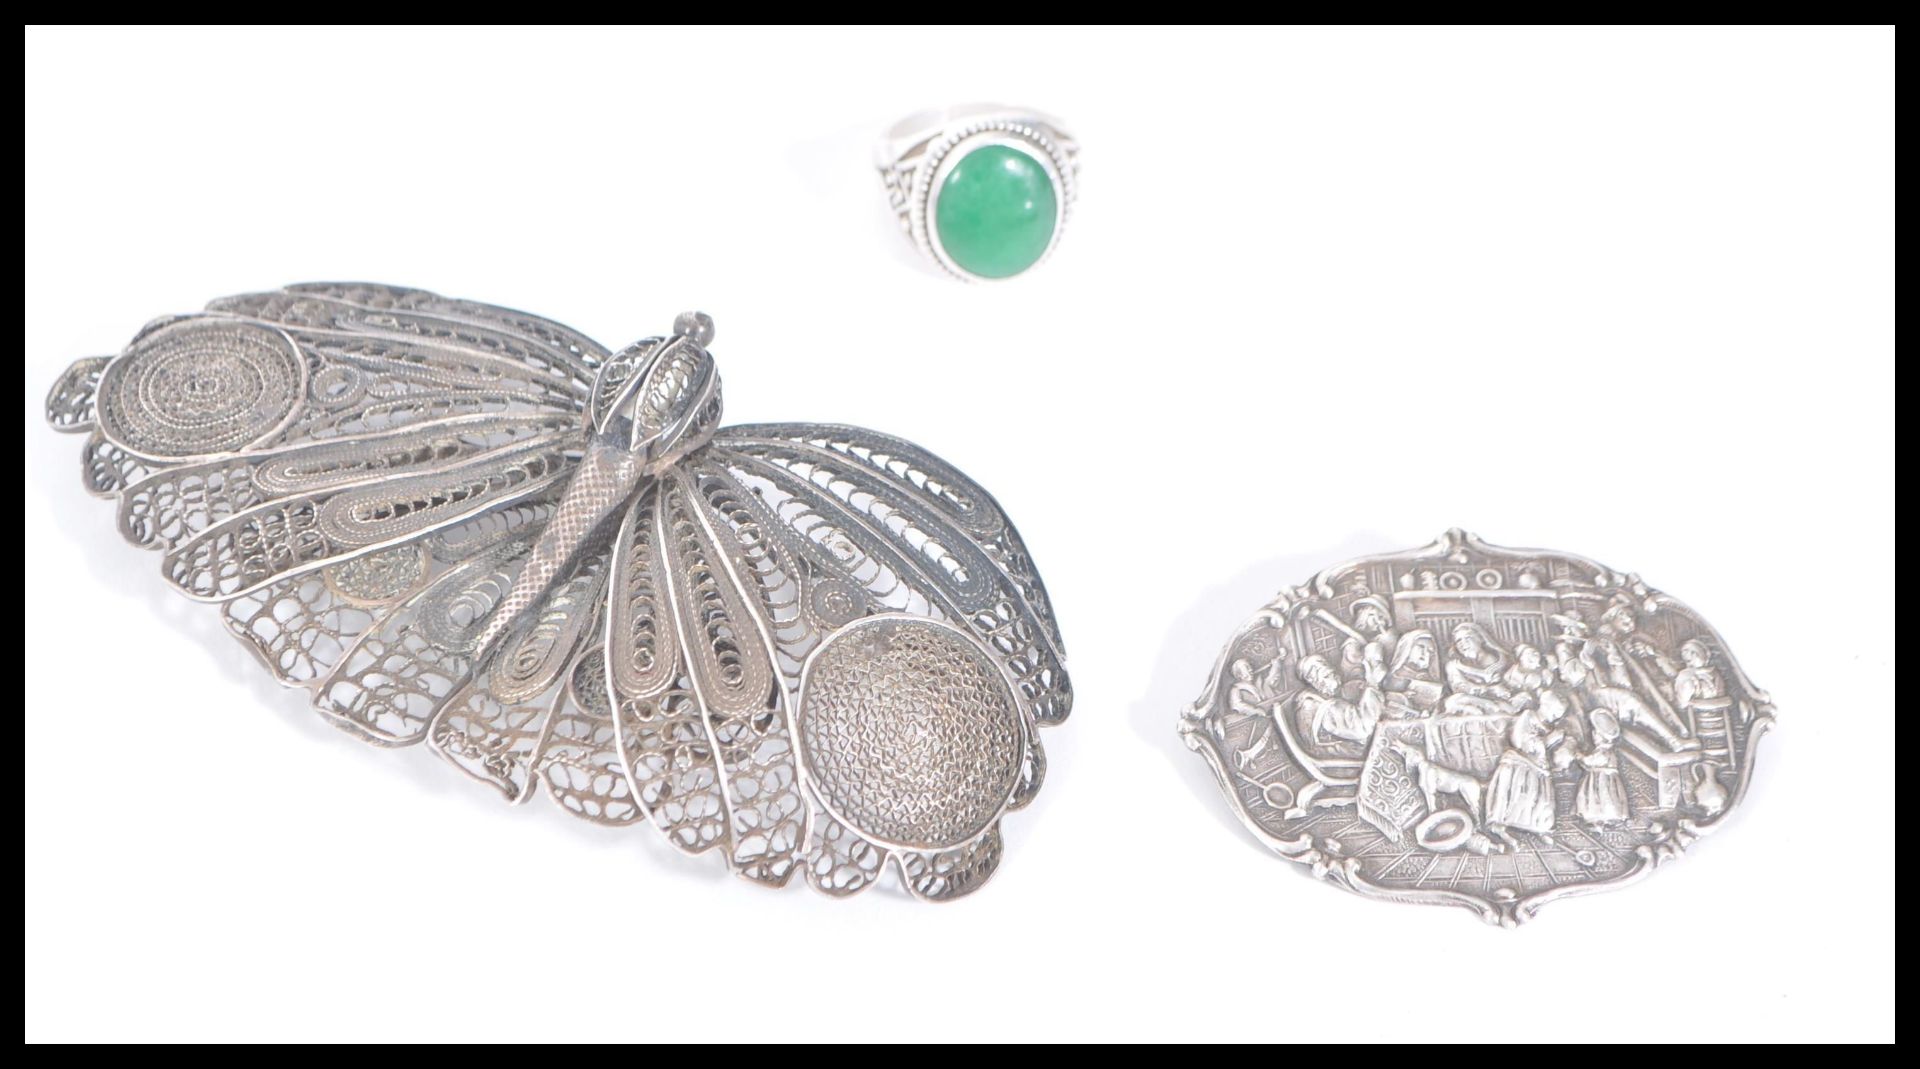 A large antique silver filigree brooch in the form of a butterfly along with a silver brooch